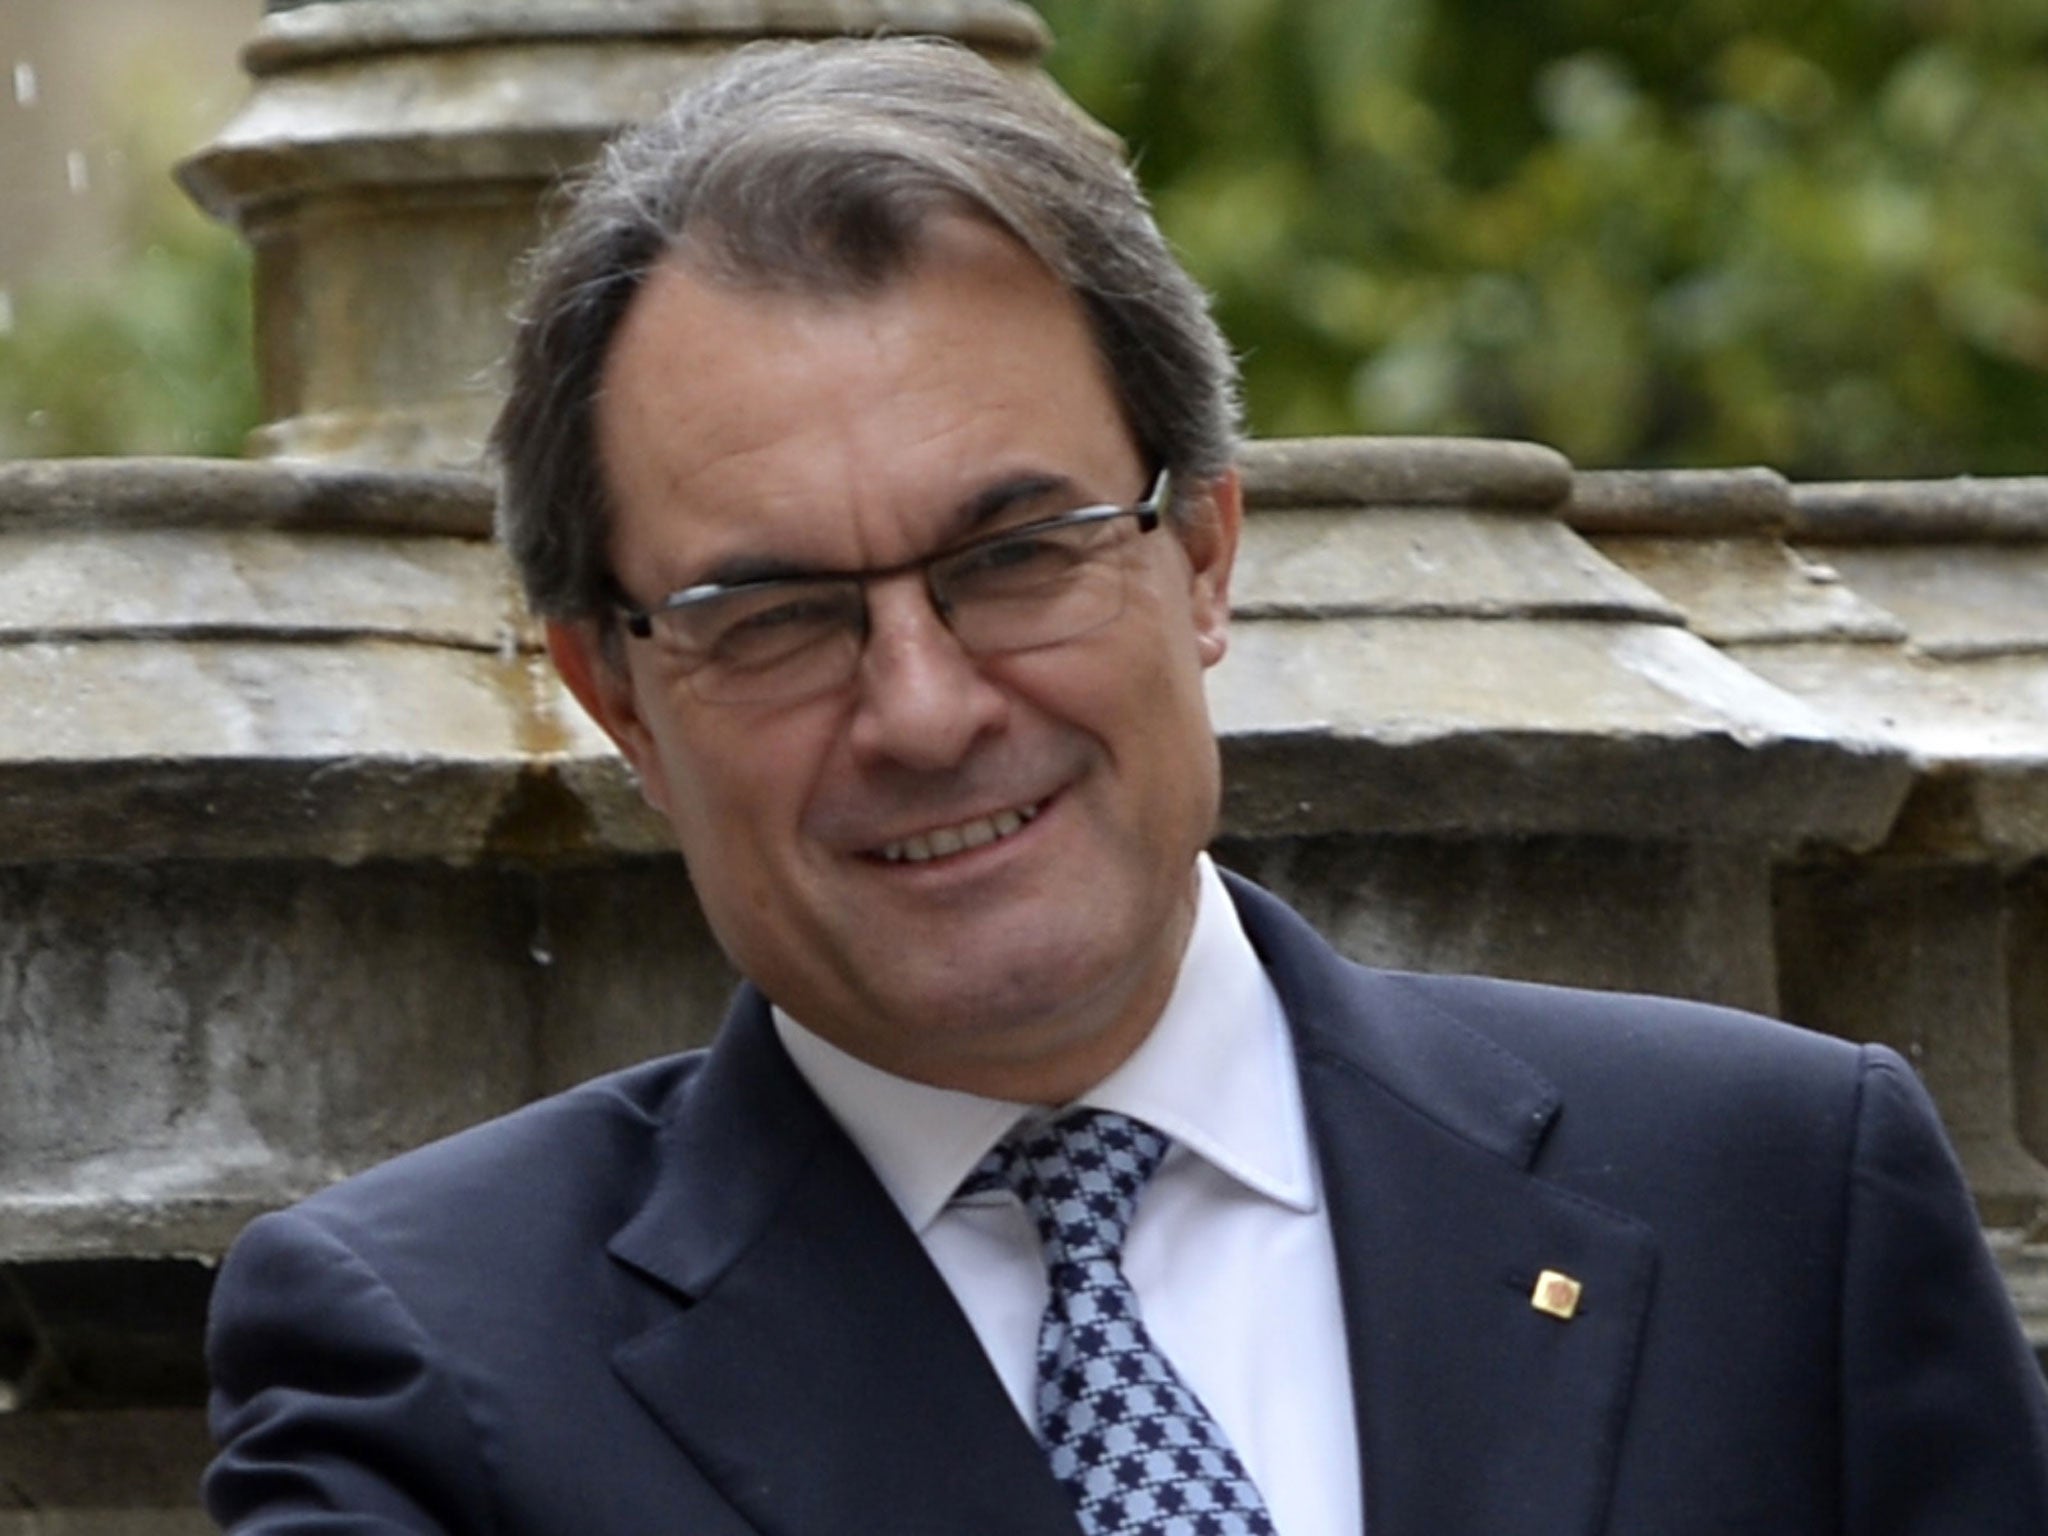 Artur Mas wrote to EU leaders asking for support in a vote for independence from Spain